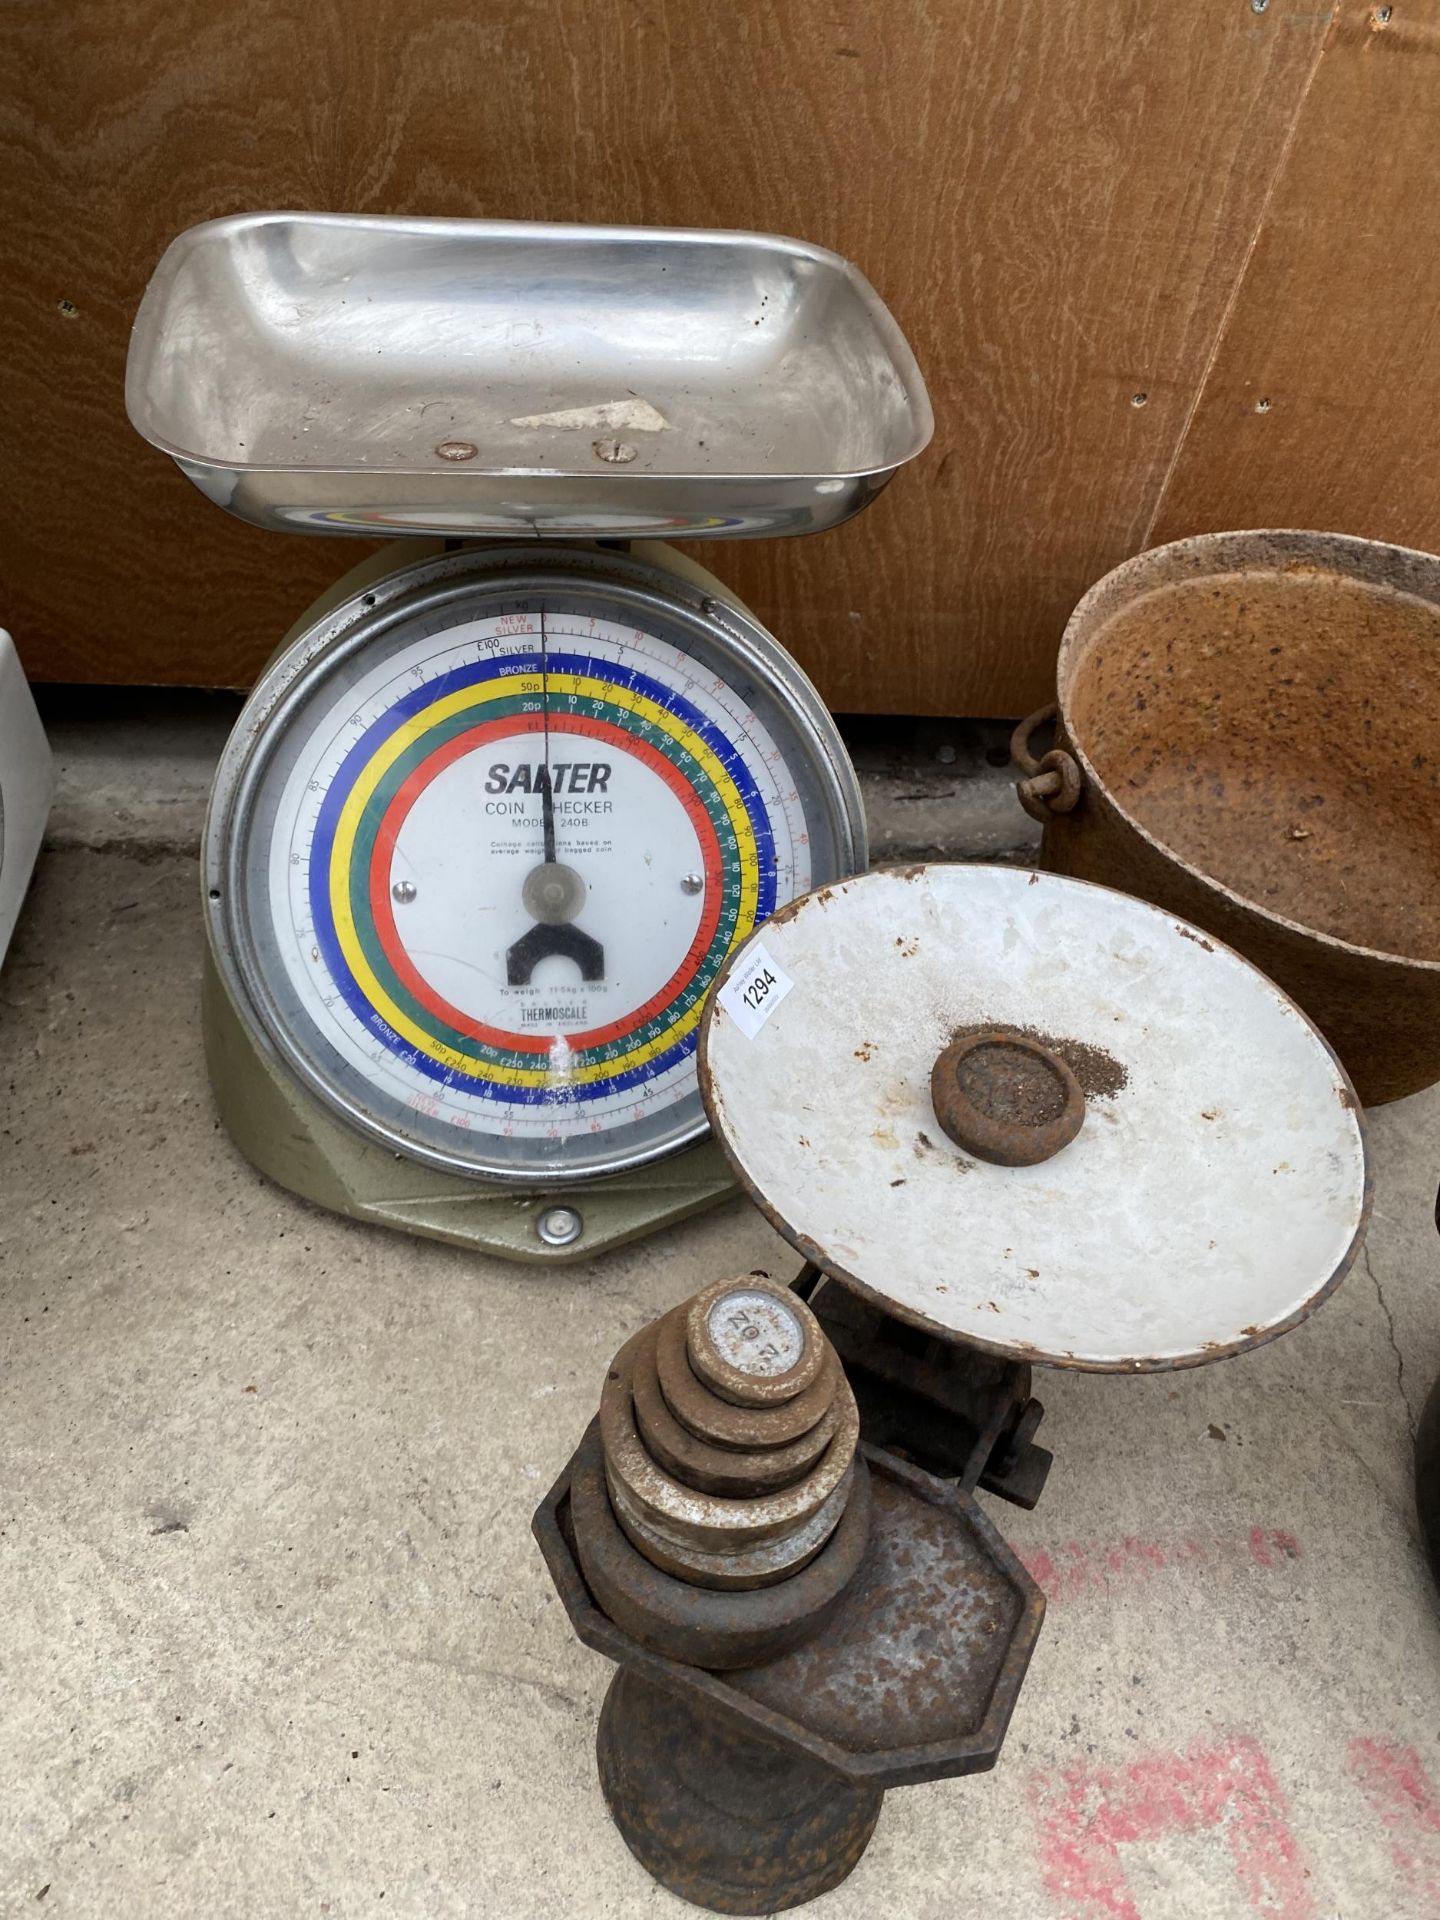 A VINTAGE SALTER COIN CHECKER SCALE AND A SET OF VINTAGE KITCHEN BALANCE SCALES WITH WEIGHTS